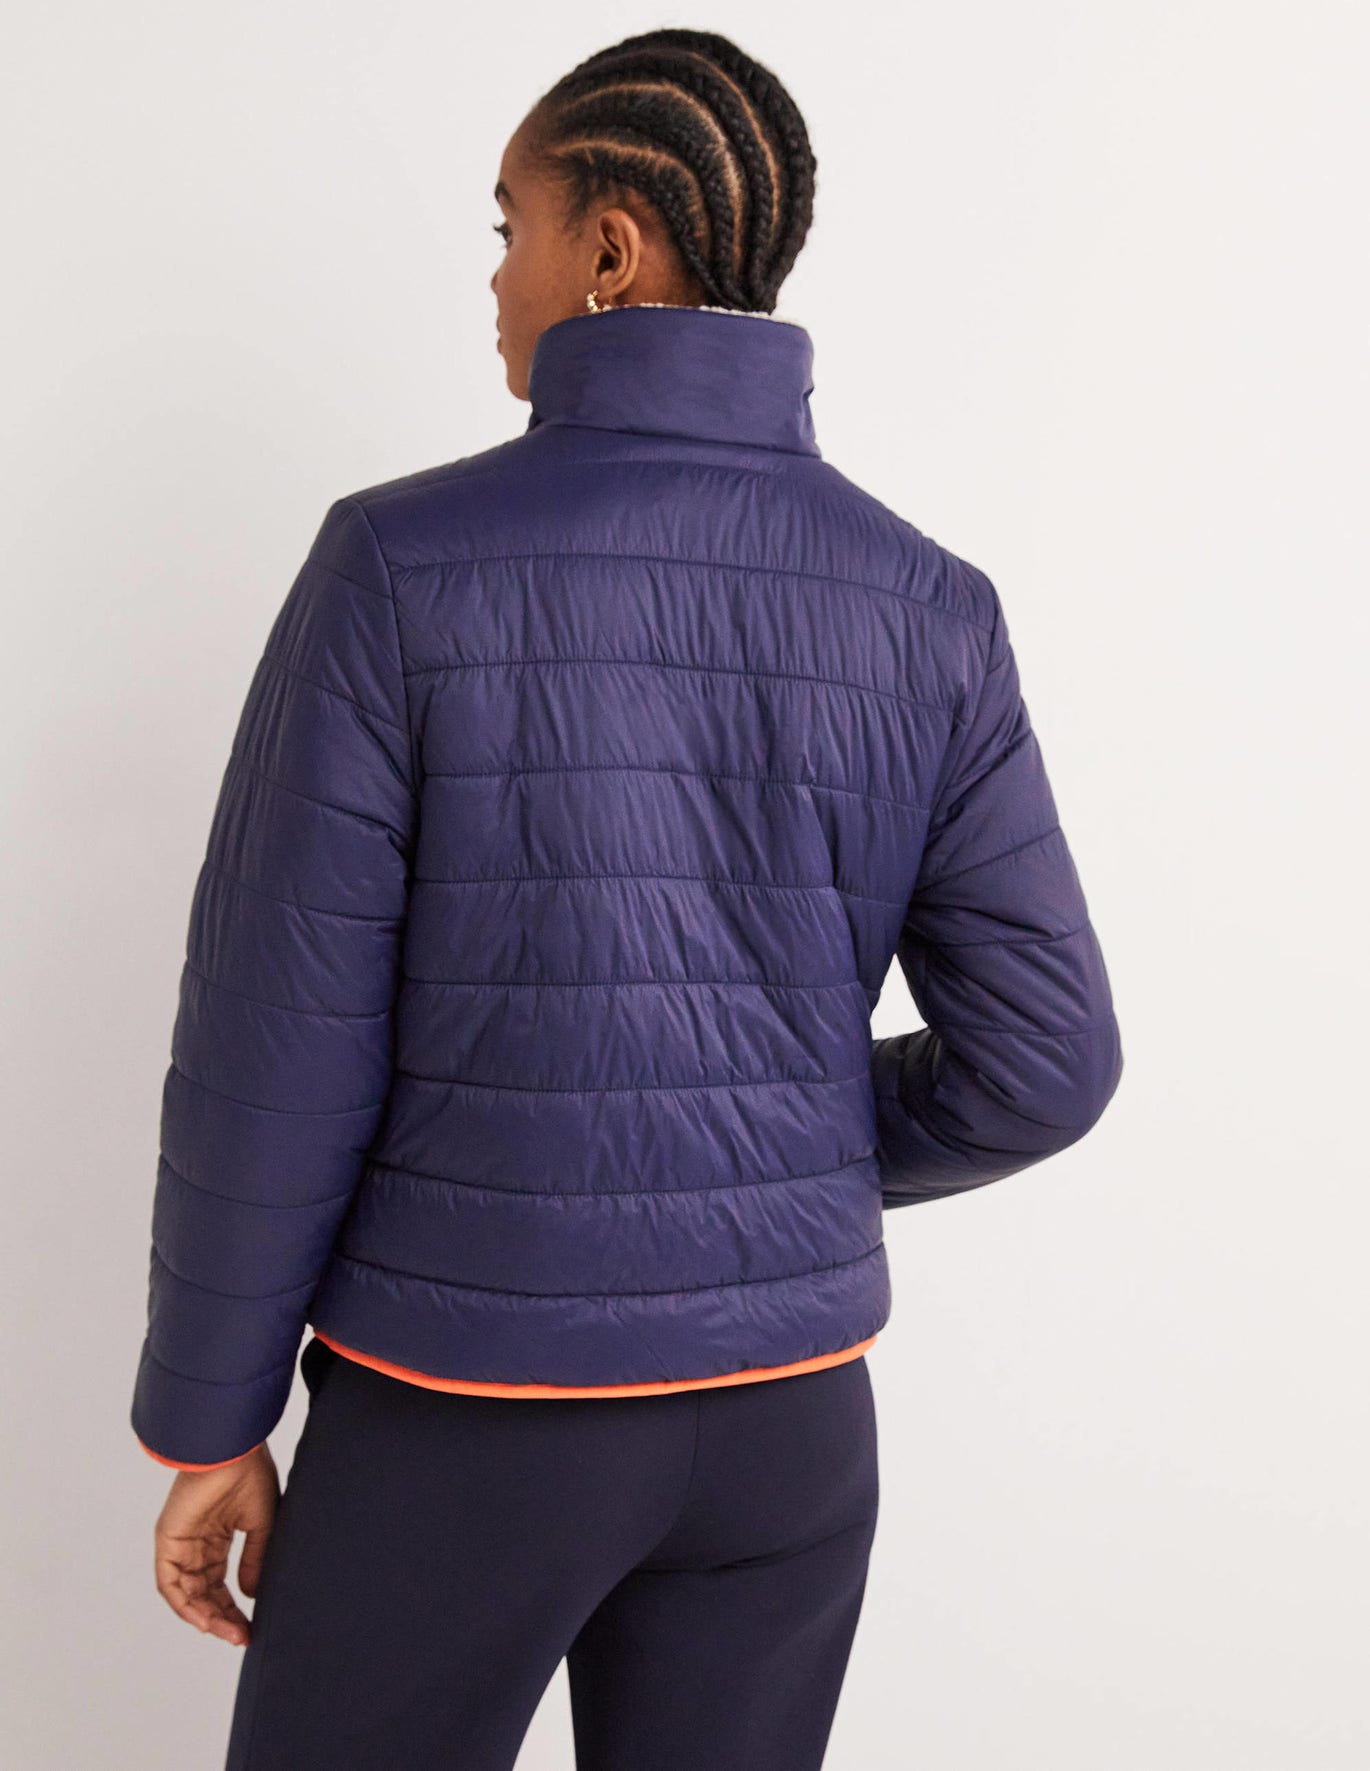 Boden Reversible Borg Puffer Jacket - Navy and Tigerlily Red